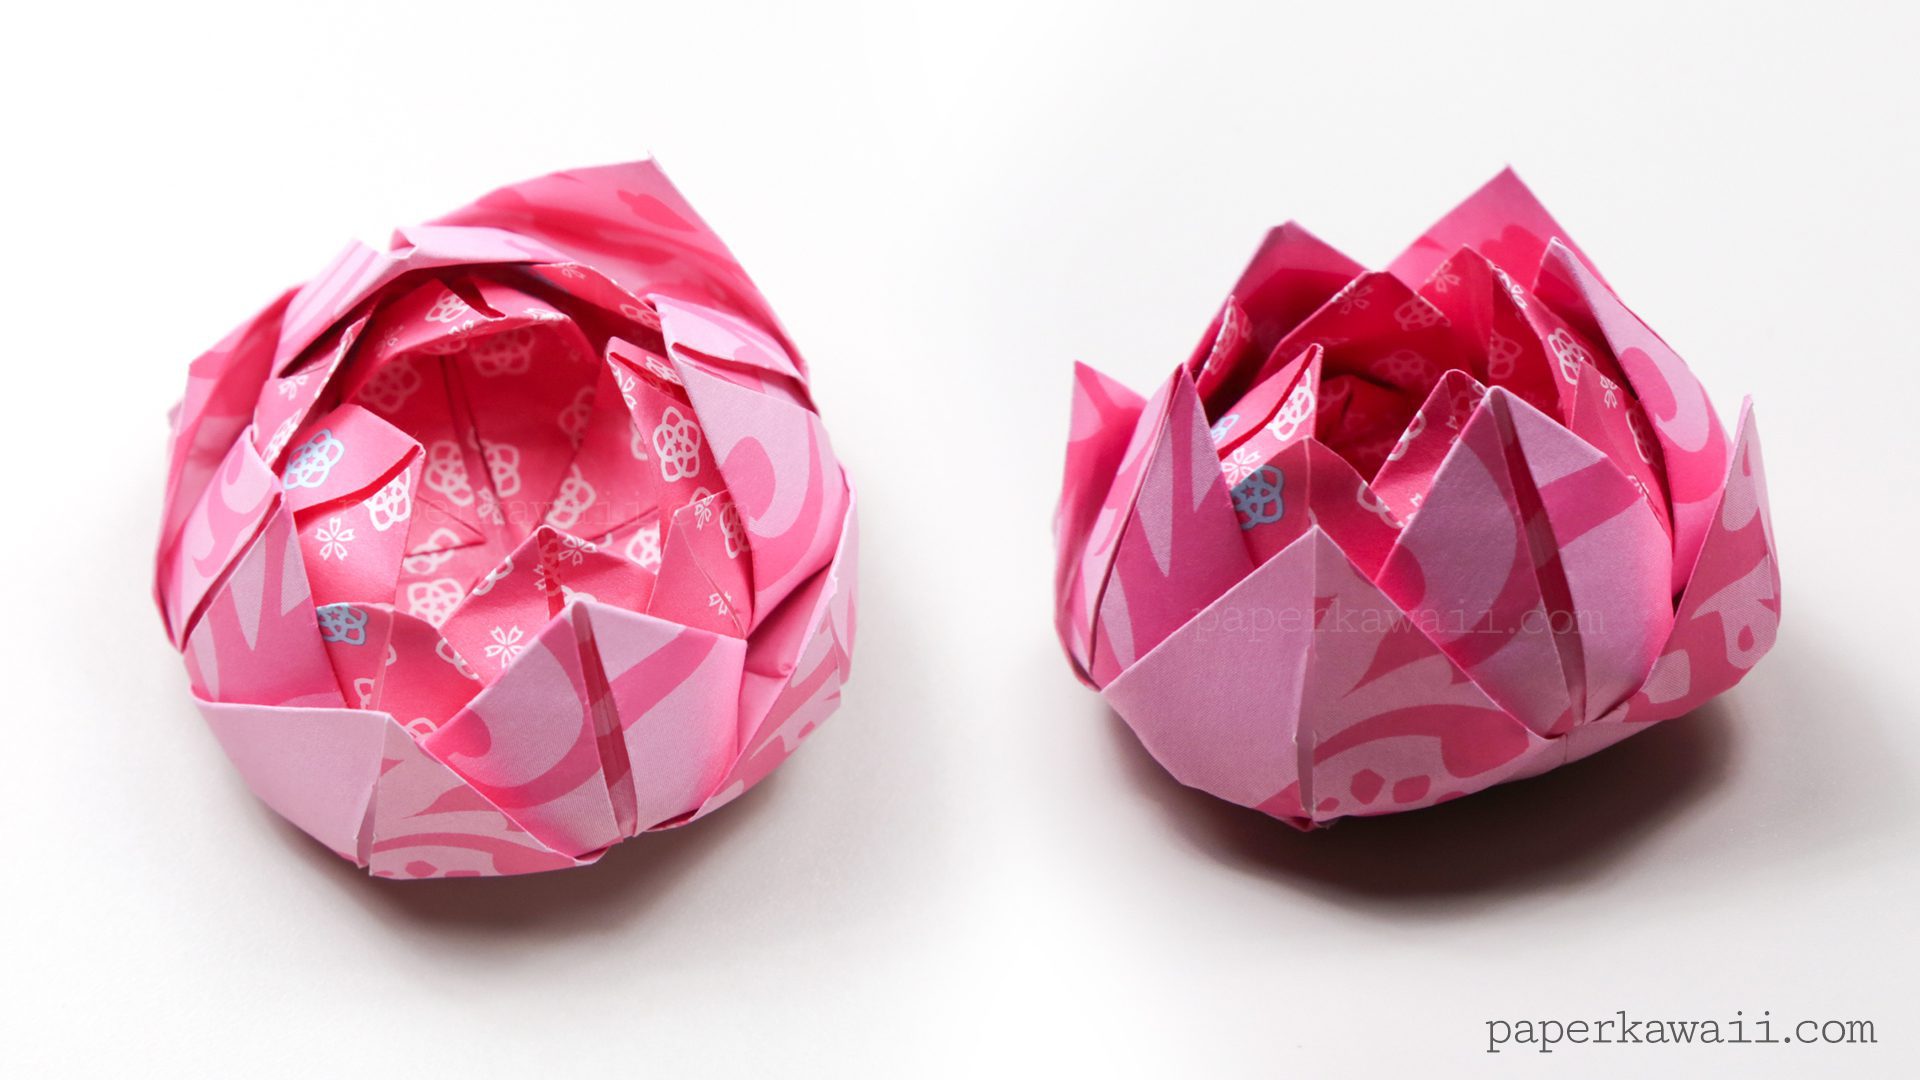 easy traditional origami lotus instructions #origami #diy #crafts #instructions